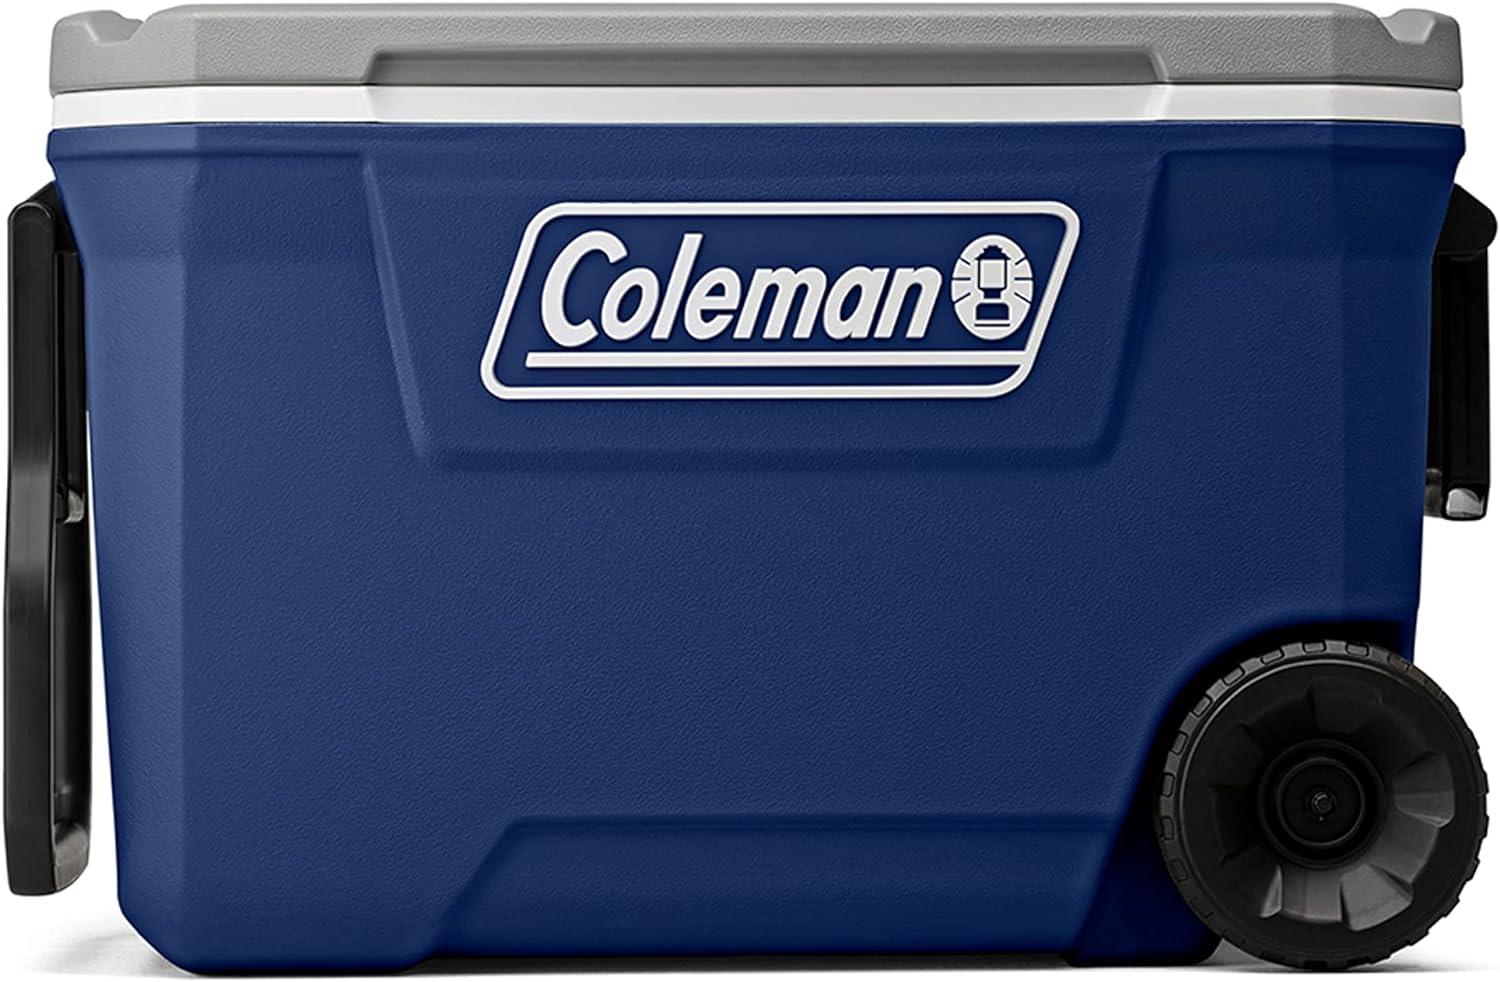 Coleman 316 Series Insulated Portable Cooler with Heavy Duty Wheels $44.67 Shipped